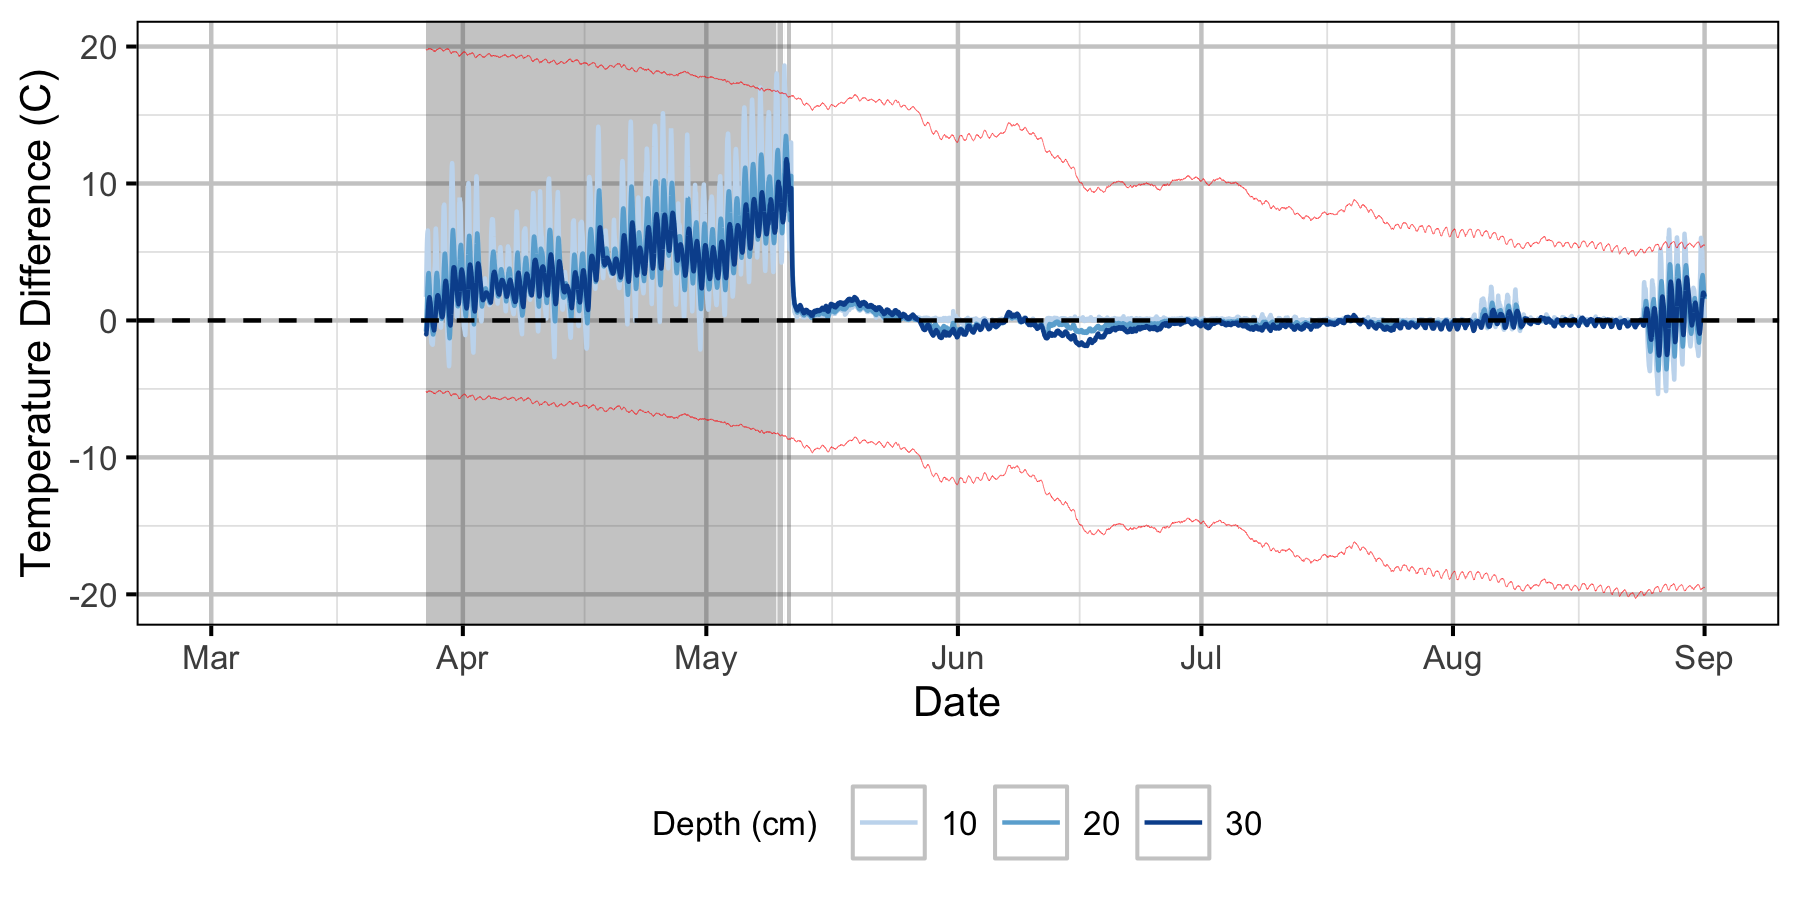 figures/Sensor Data/Relative Gravel Temperature Stations/The Oxbow/Station18.png